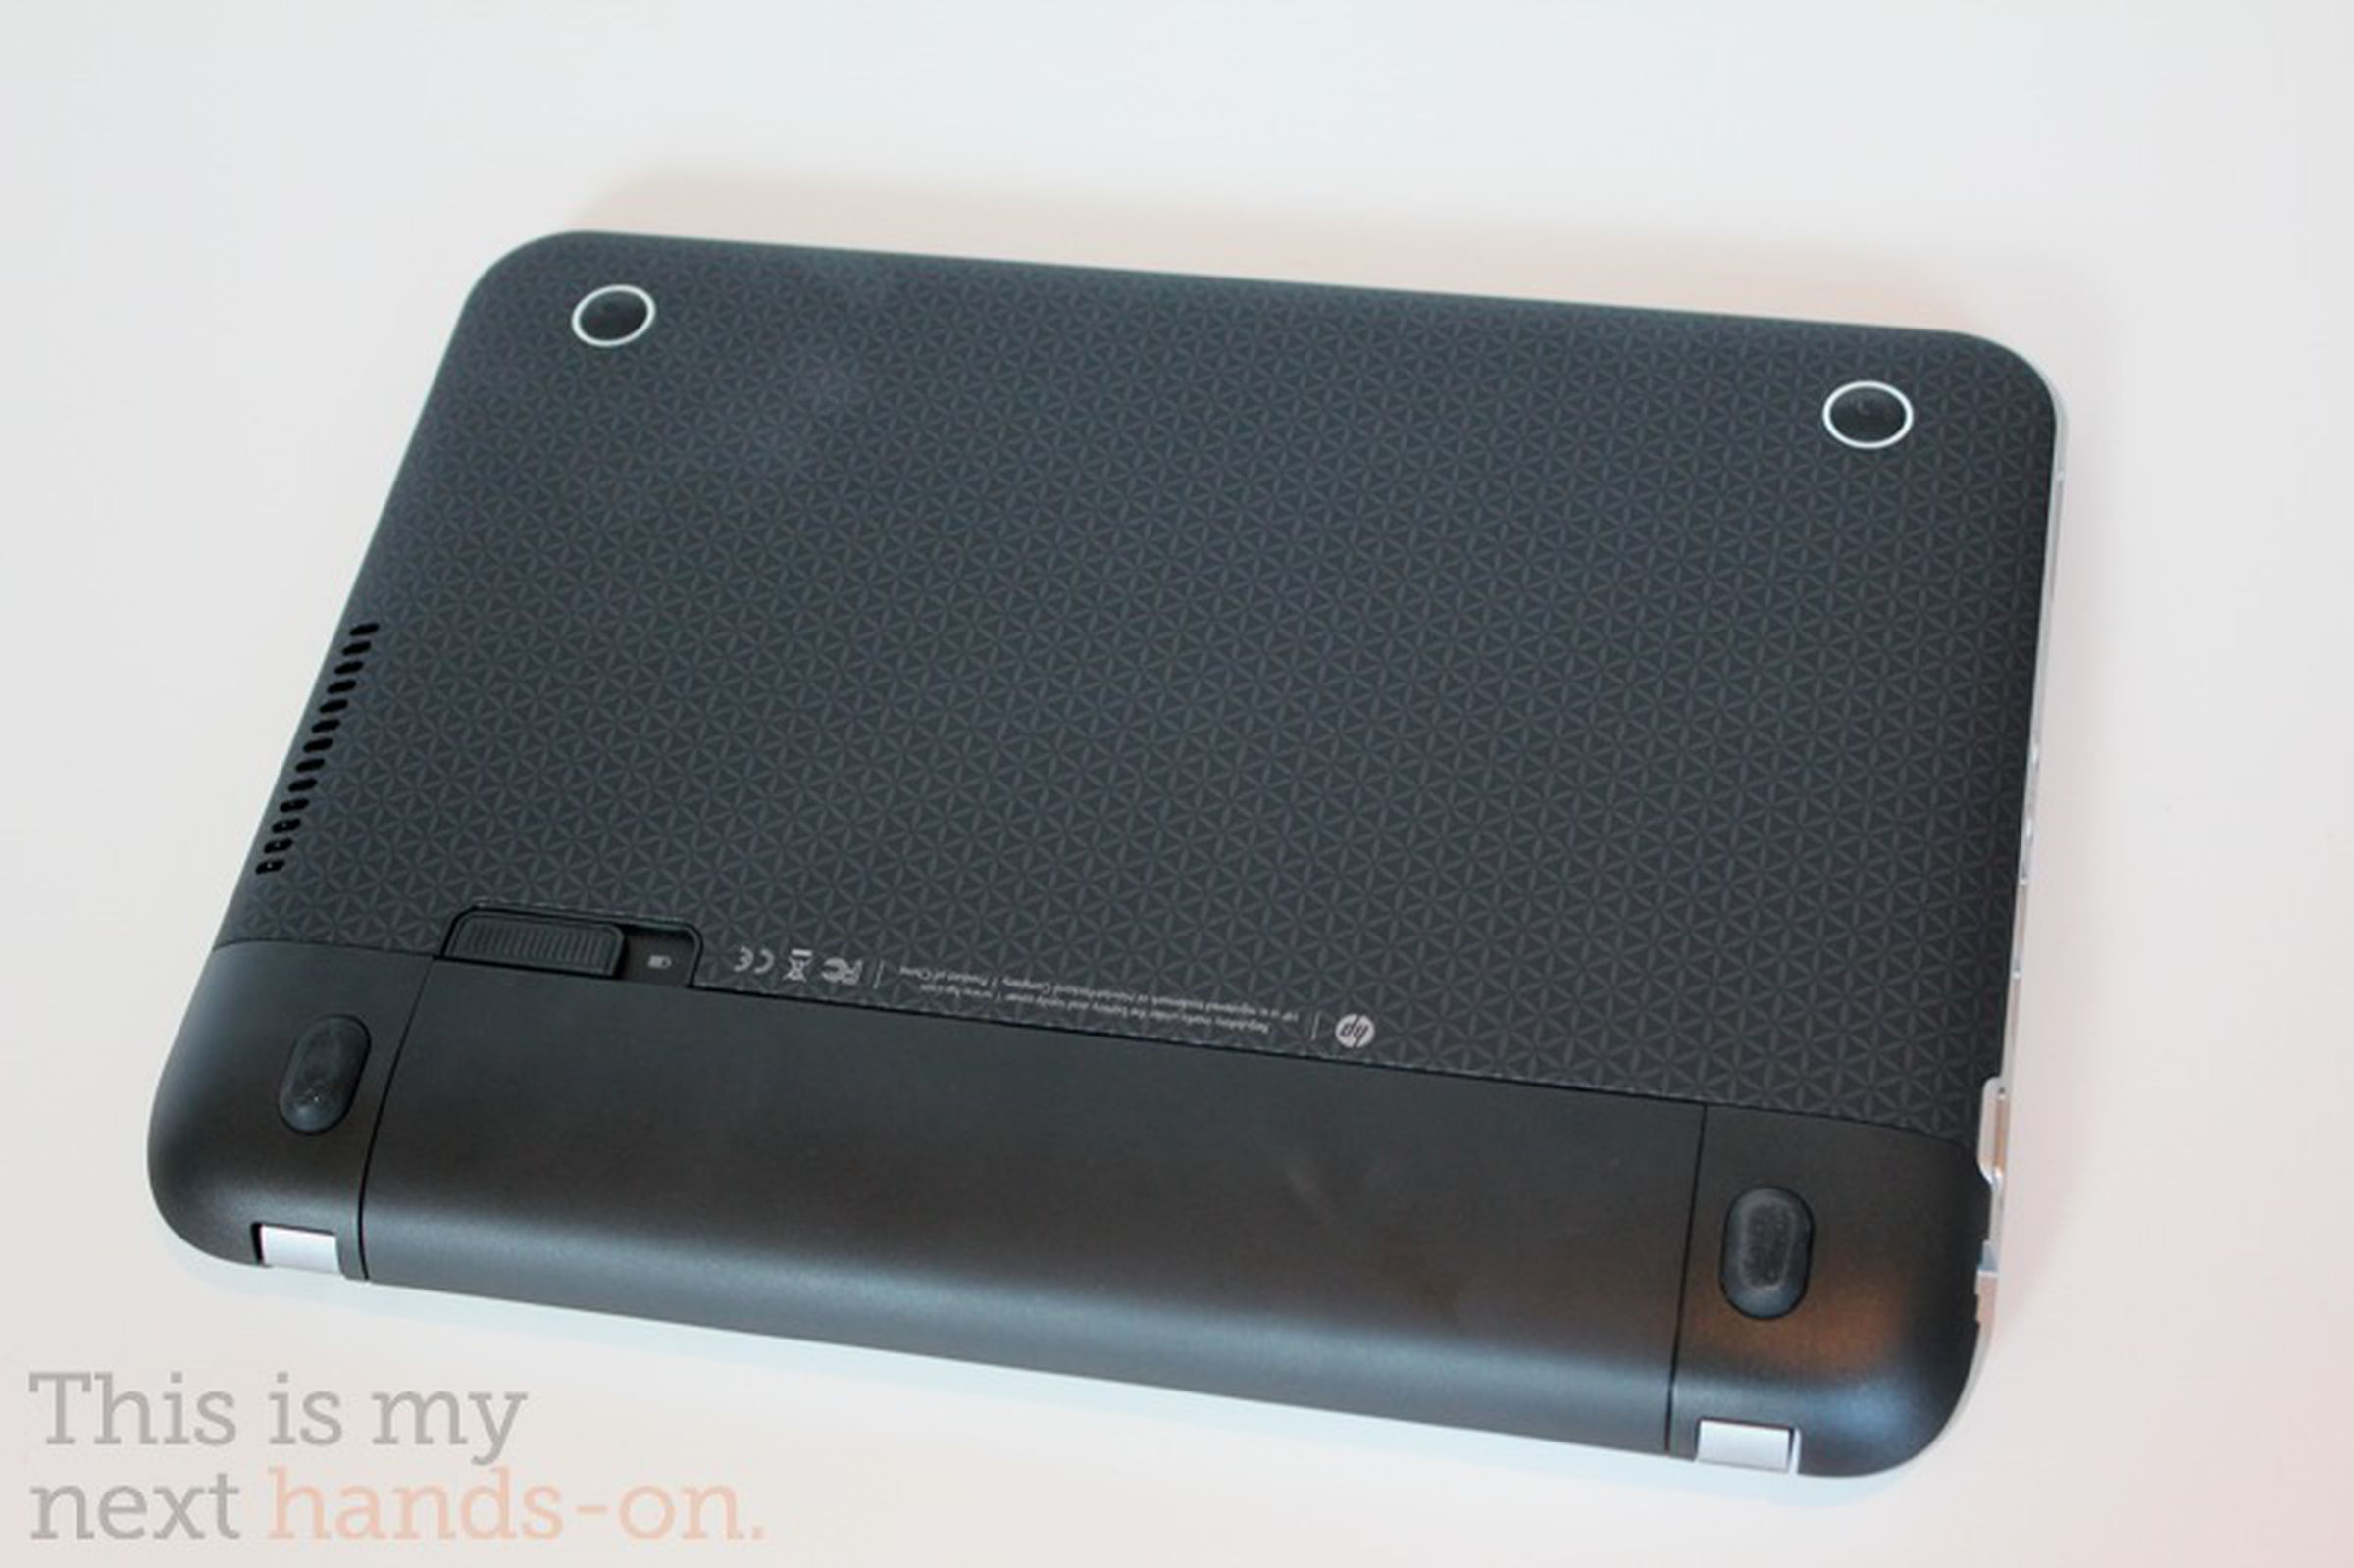 HP Pavilion dm1 refreshed — hands on photos